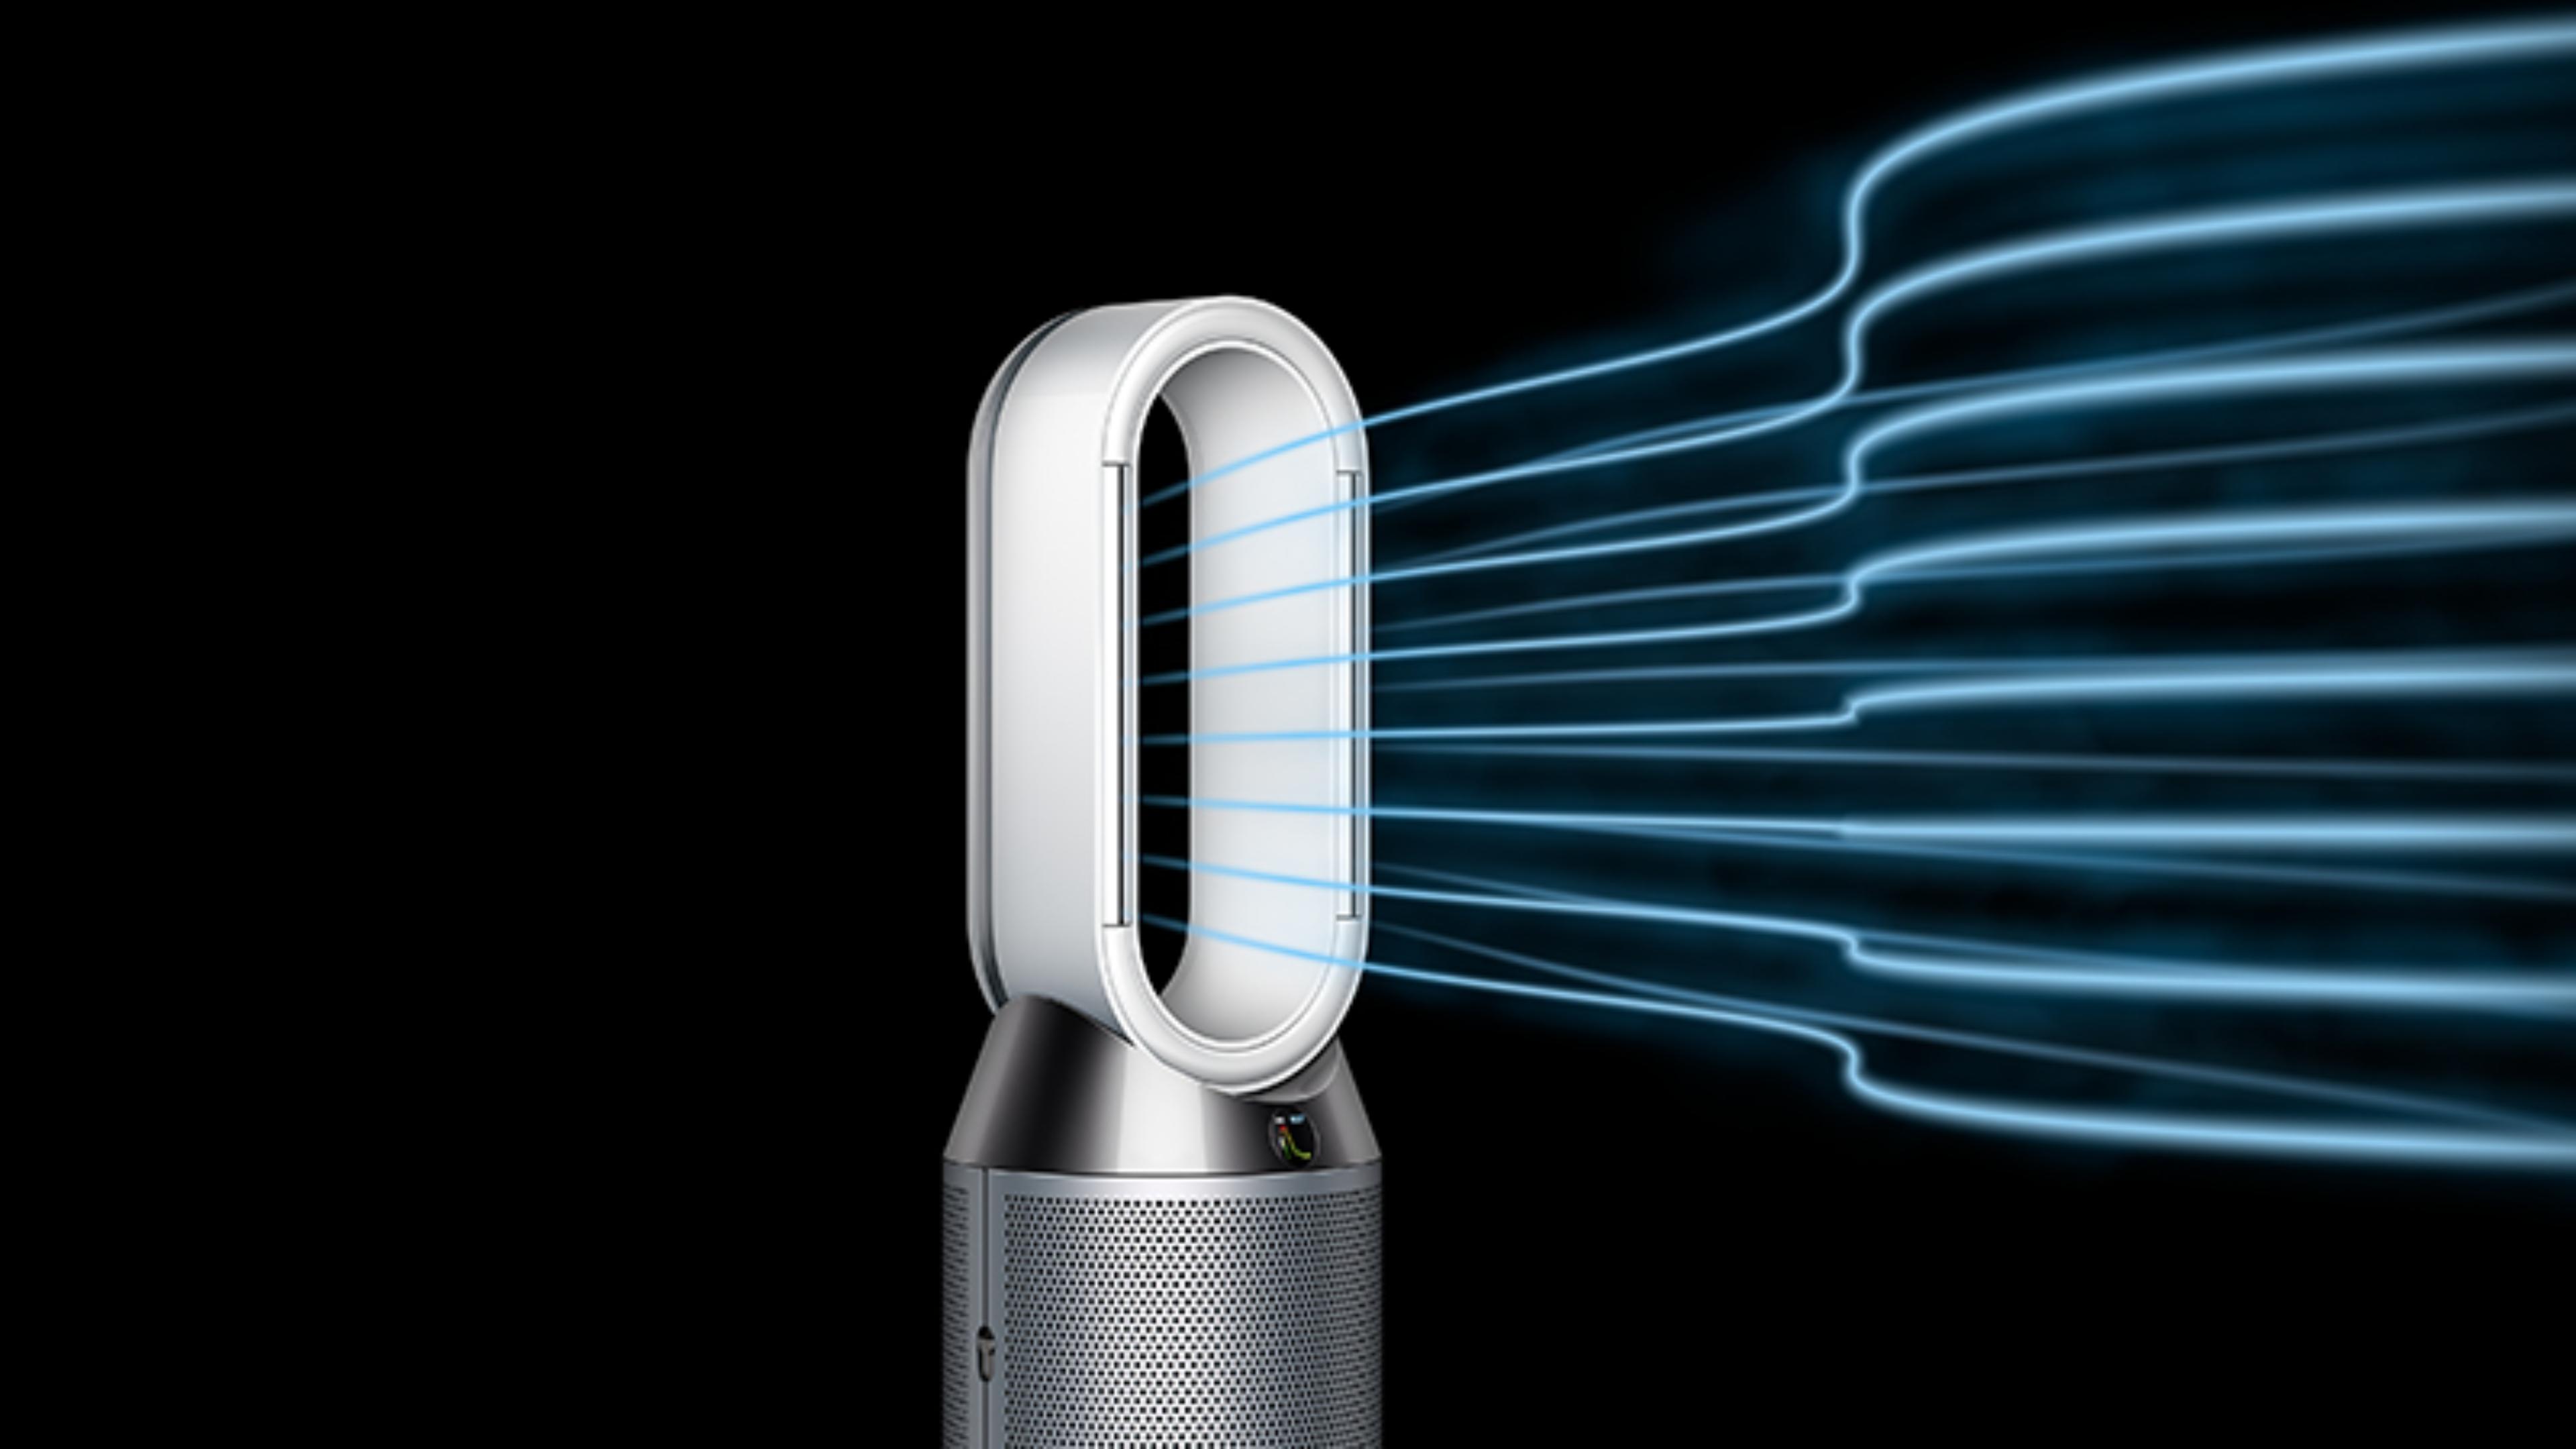 Dyson purifier filtration system capturing gases and pollutants